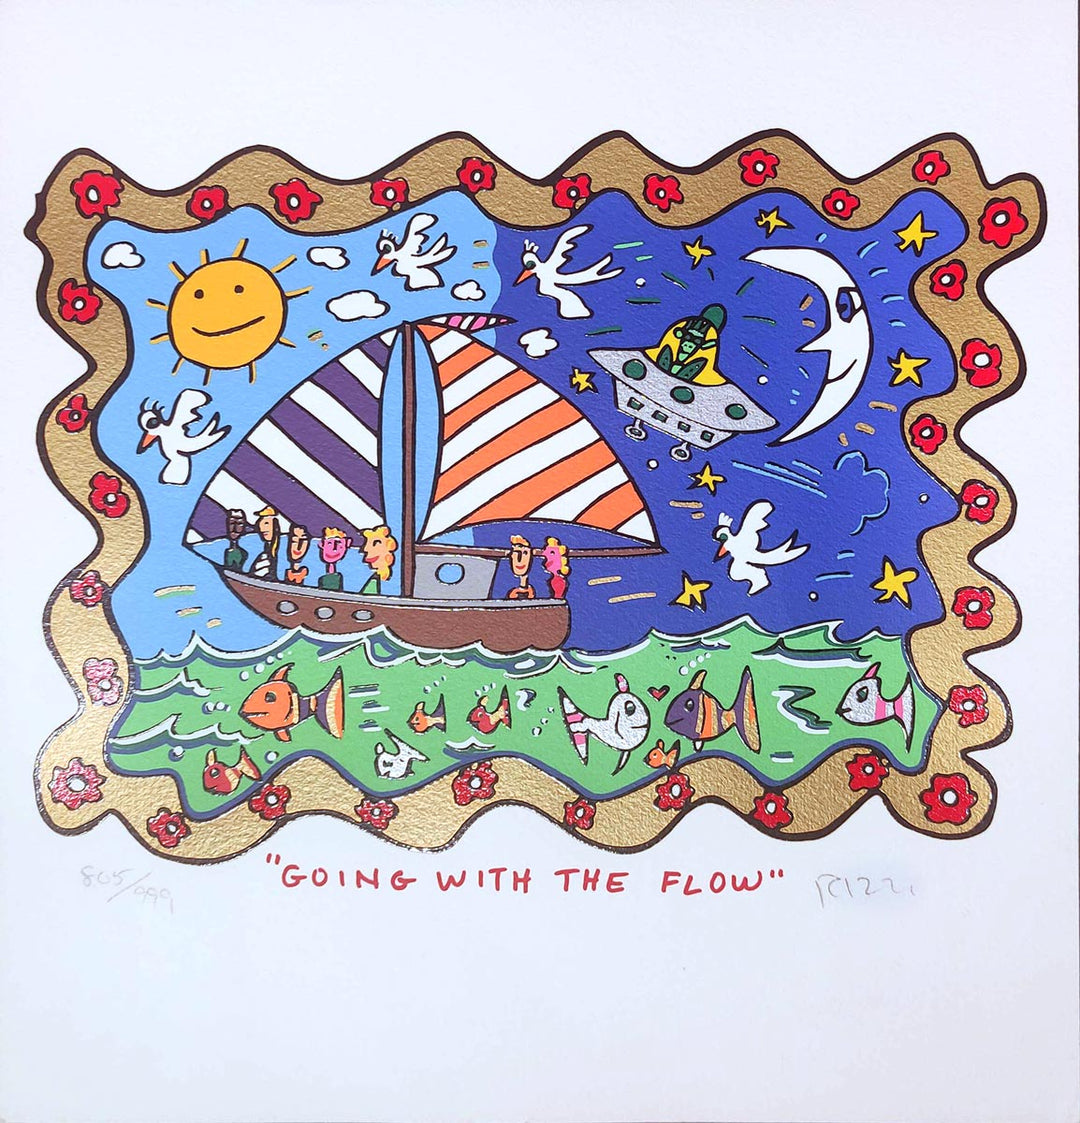 "Going with the Flow" | James Rizzi